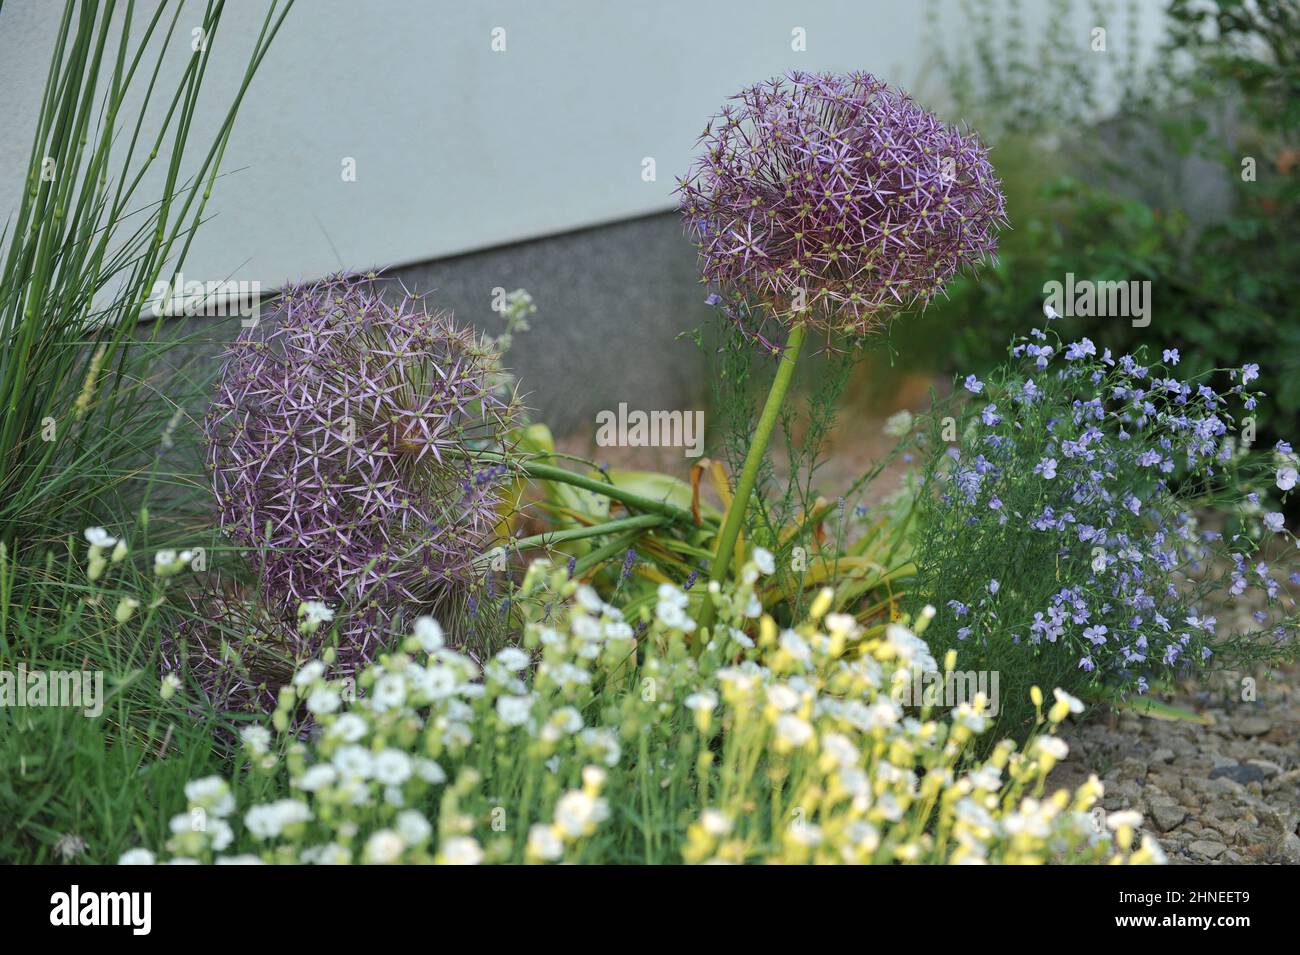 Persian onion or star of Persia (Allium cristophii) and blue flax (Linum perenne) bloom in a gravel garden im June Stock Photo